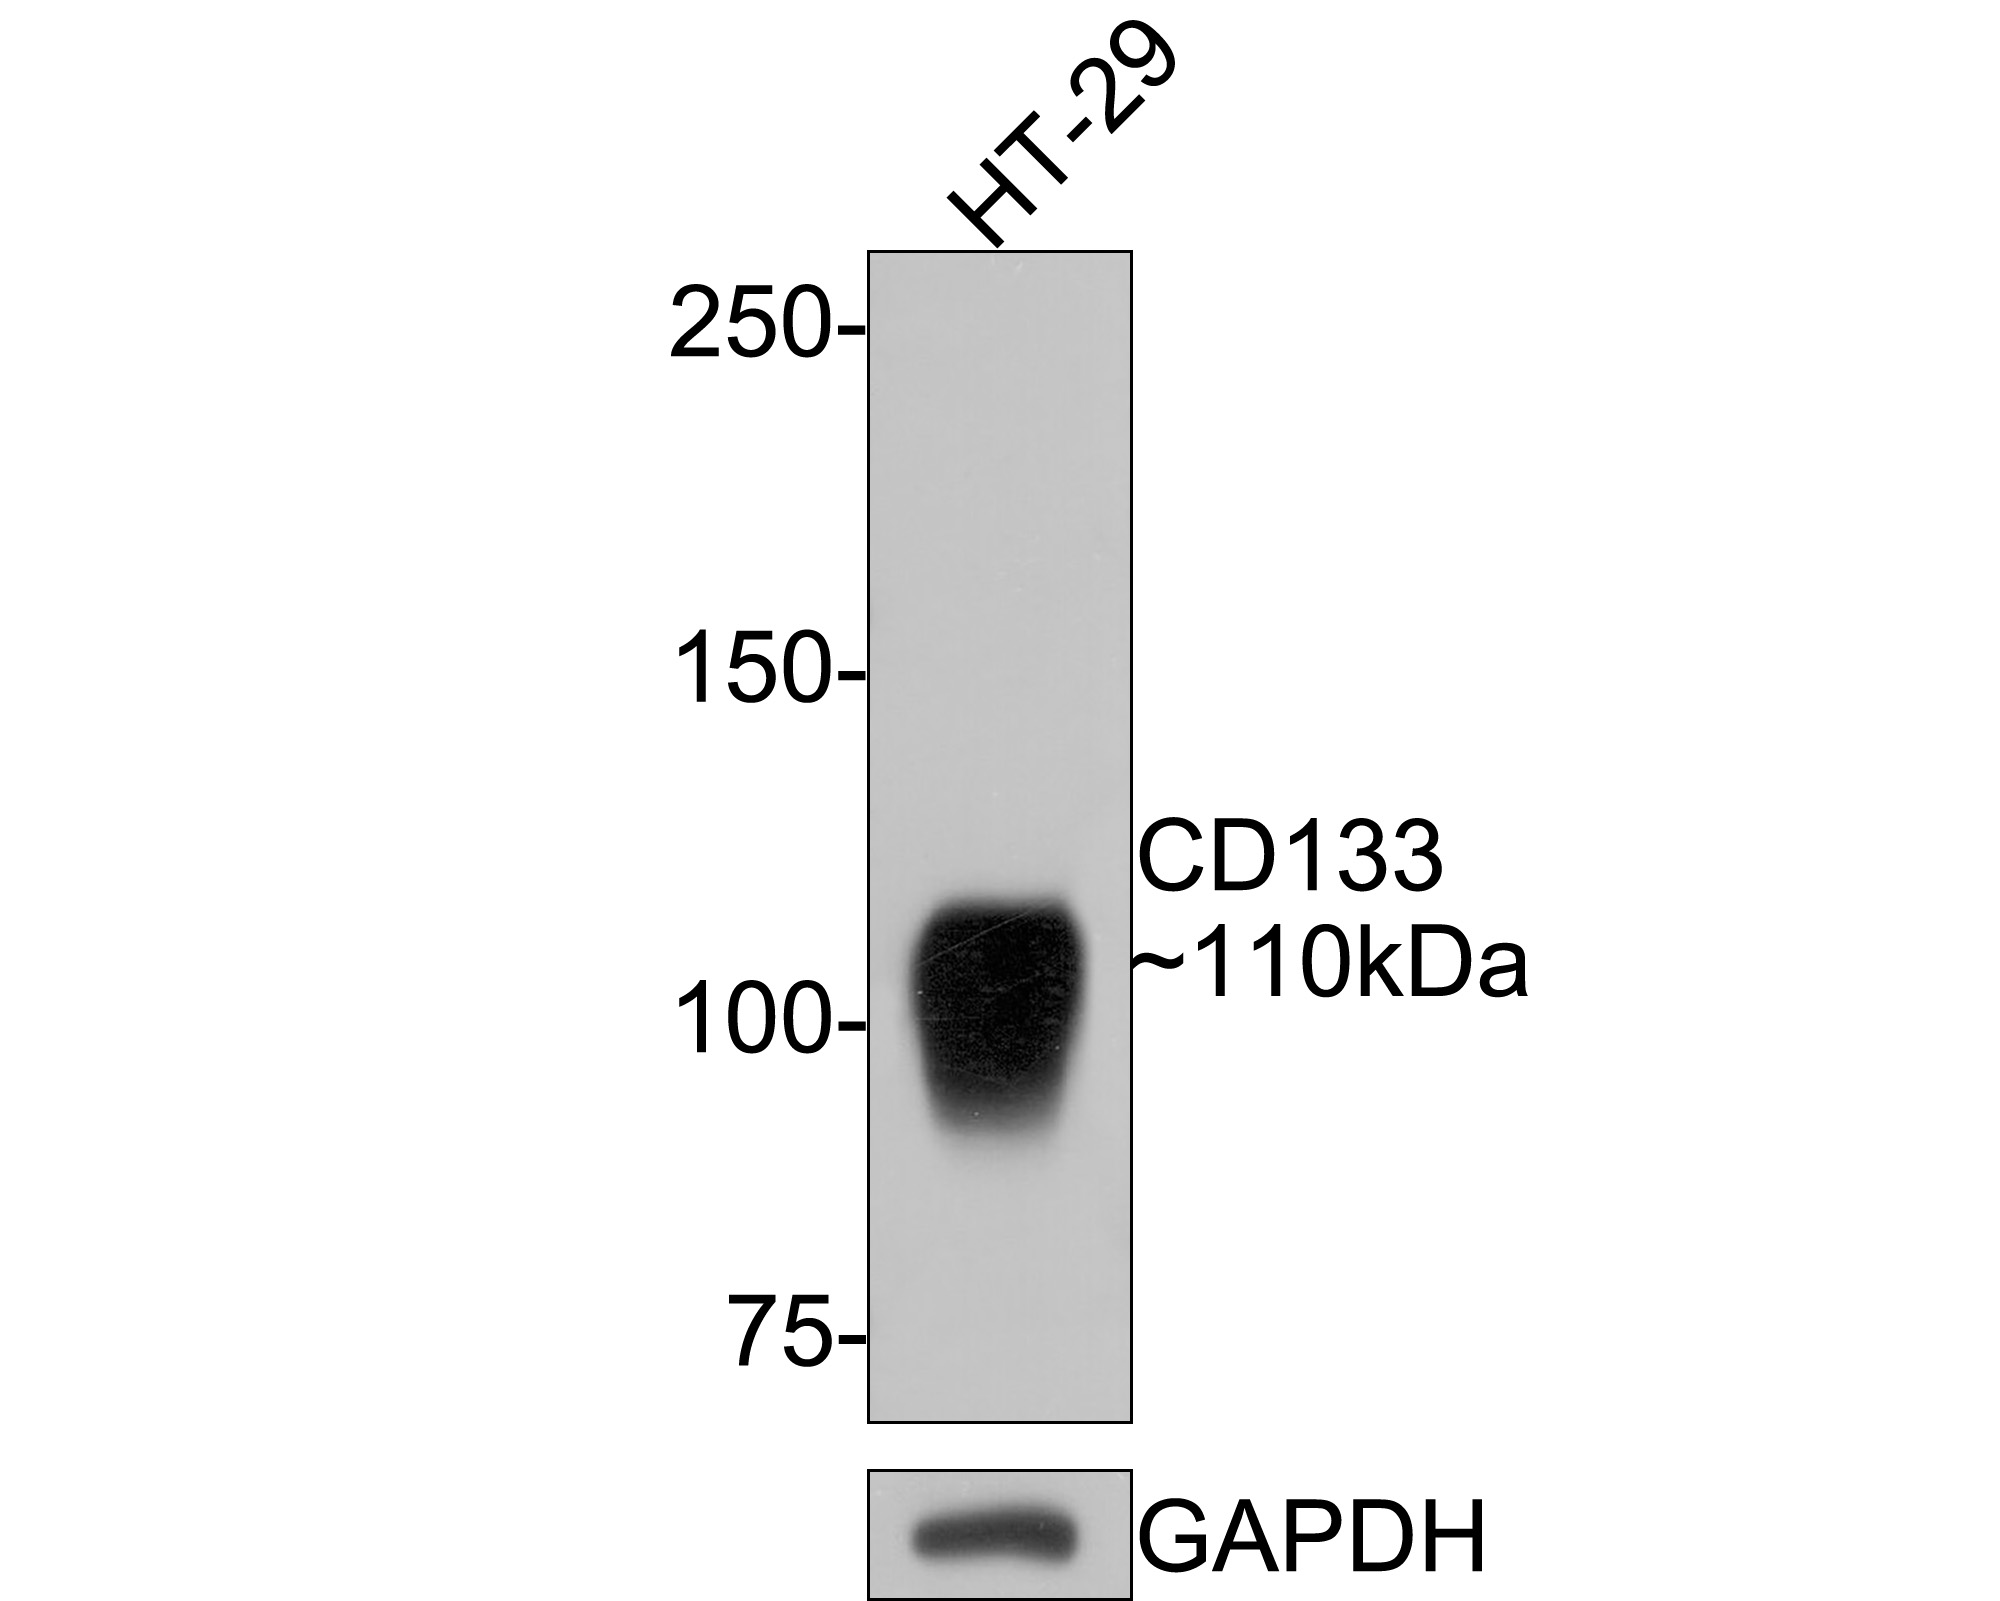 Western blot analysis of CD133 on HT-29 cell lysates with Mouse anti-CD133 antibody (HA601025) at 1/500 dilution.<br />
<br />
Lysates/proteins at 10 µg/Lane.<br />
<br />
Predicted band size: 97 kDa<br />
Observed band size: 110 kDa<br />
<br />
Exposure time: 1 minute;<br />
<br />
6% SDS-PAGE gel.<br />
<br />
Proteins were transferred to a PVDF membrane and blocked with 5% NFDM/TBST for 1 hour at room temperature. The primary antibody (HA601025) at 1/500 dilution was used in 5% NFDM/TBST at room temperature for 2 hours. Goat Anti-Mouse IgG - HRP Secondary Antibody (HA1006) at 1:100,000 dilution was used for 1 hour at room temperature.